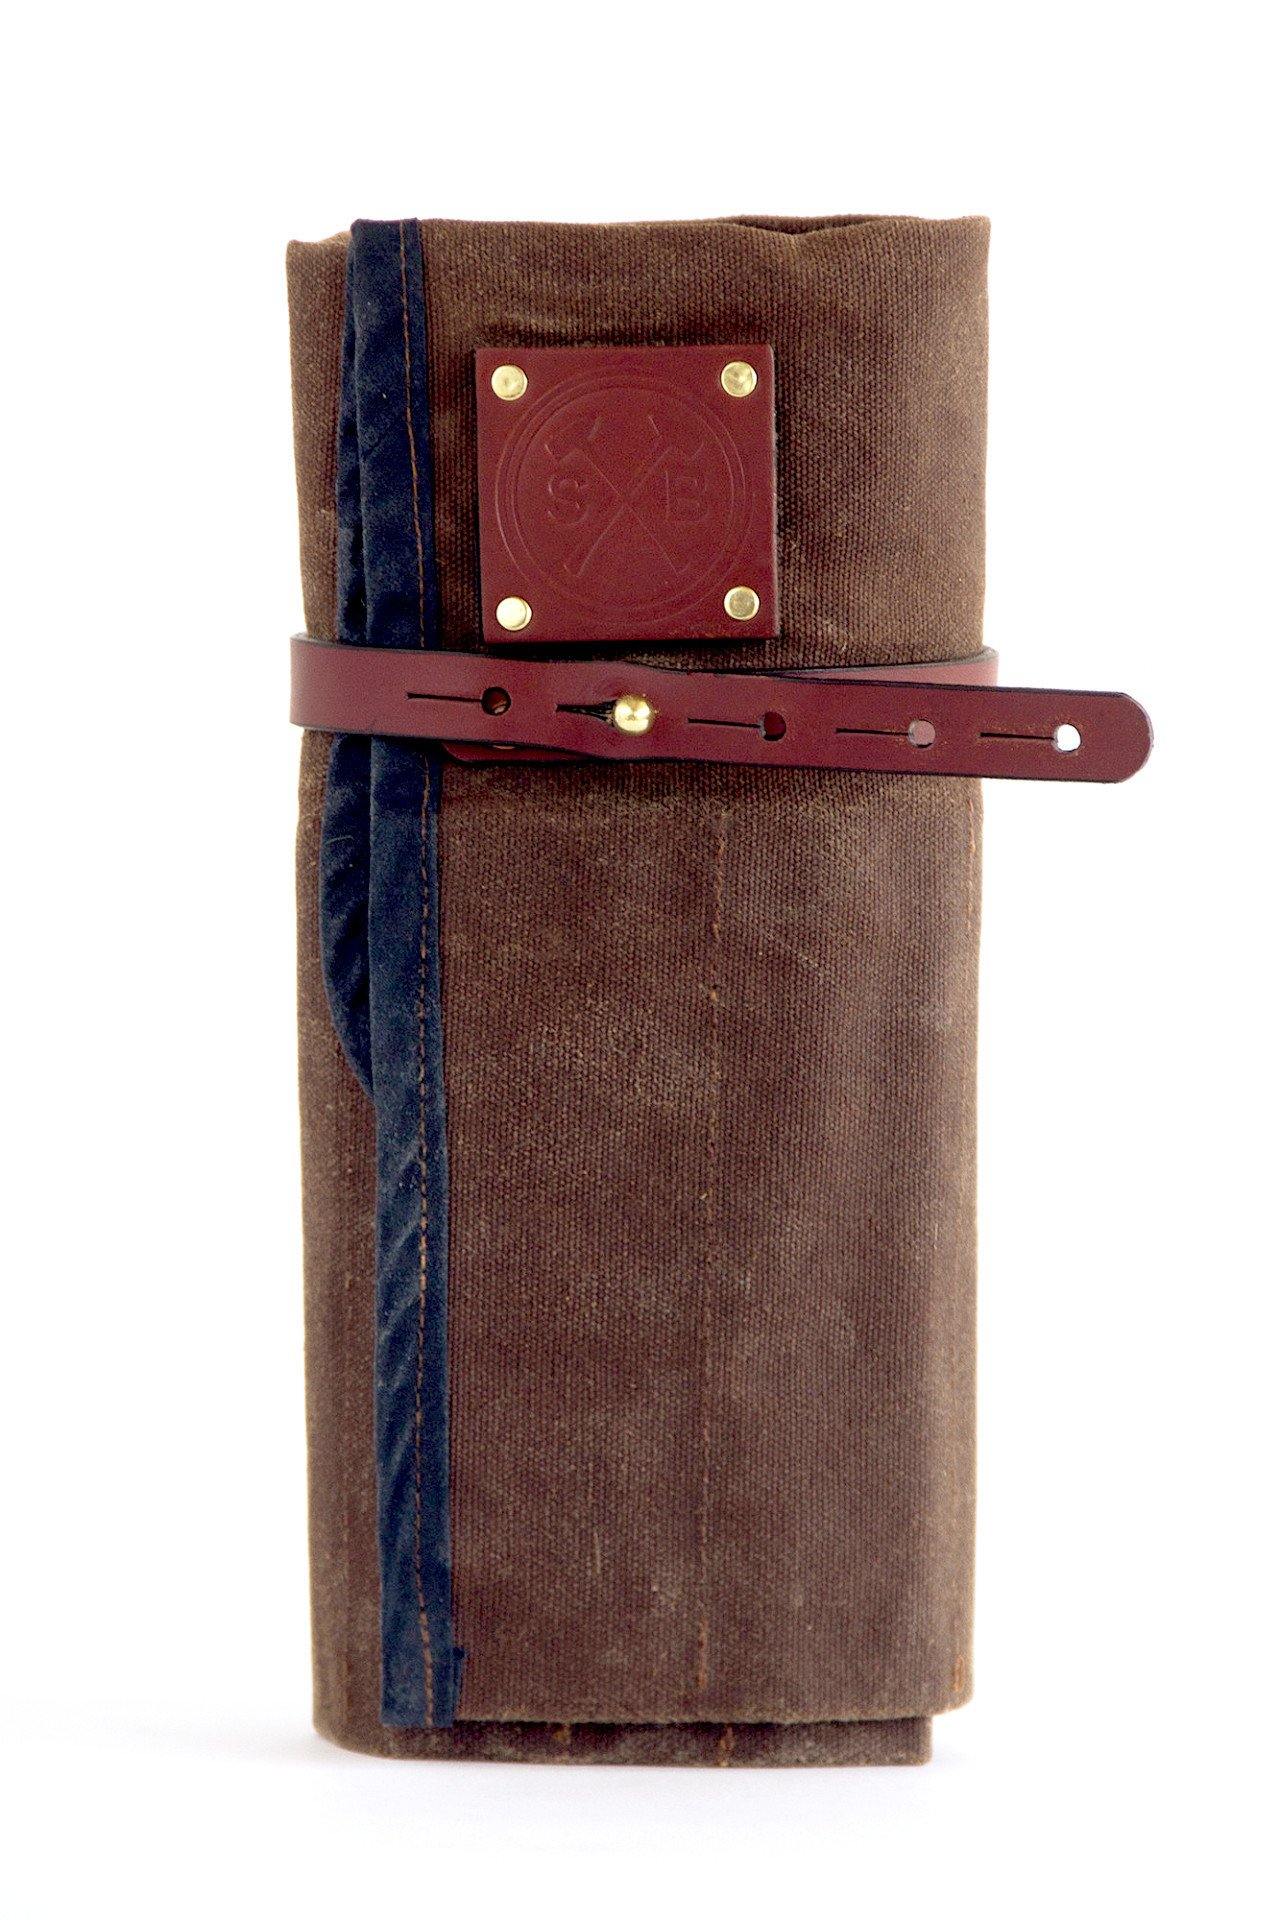 The Orville Waxed Canvas Tool Roll by Sturdy Brothers